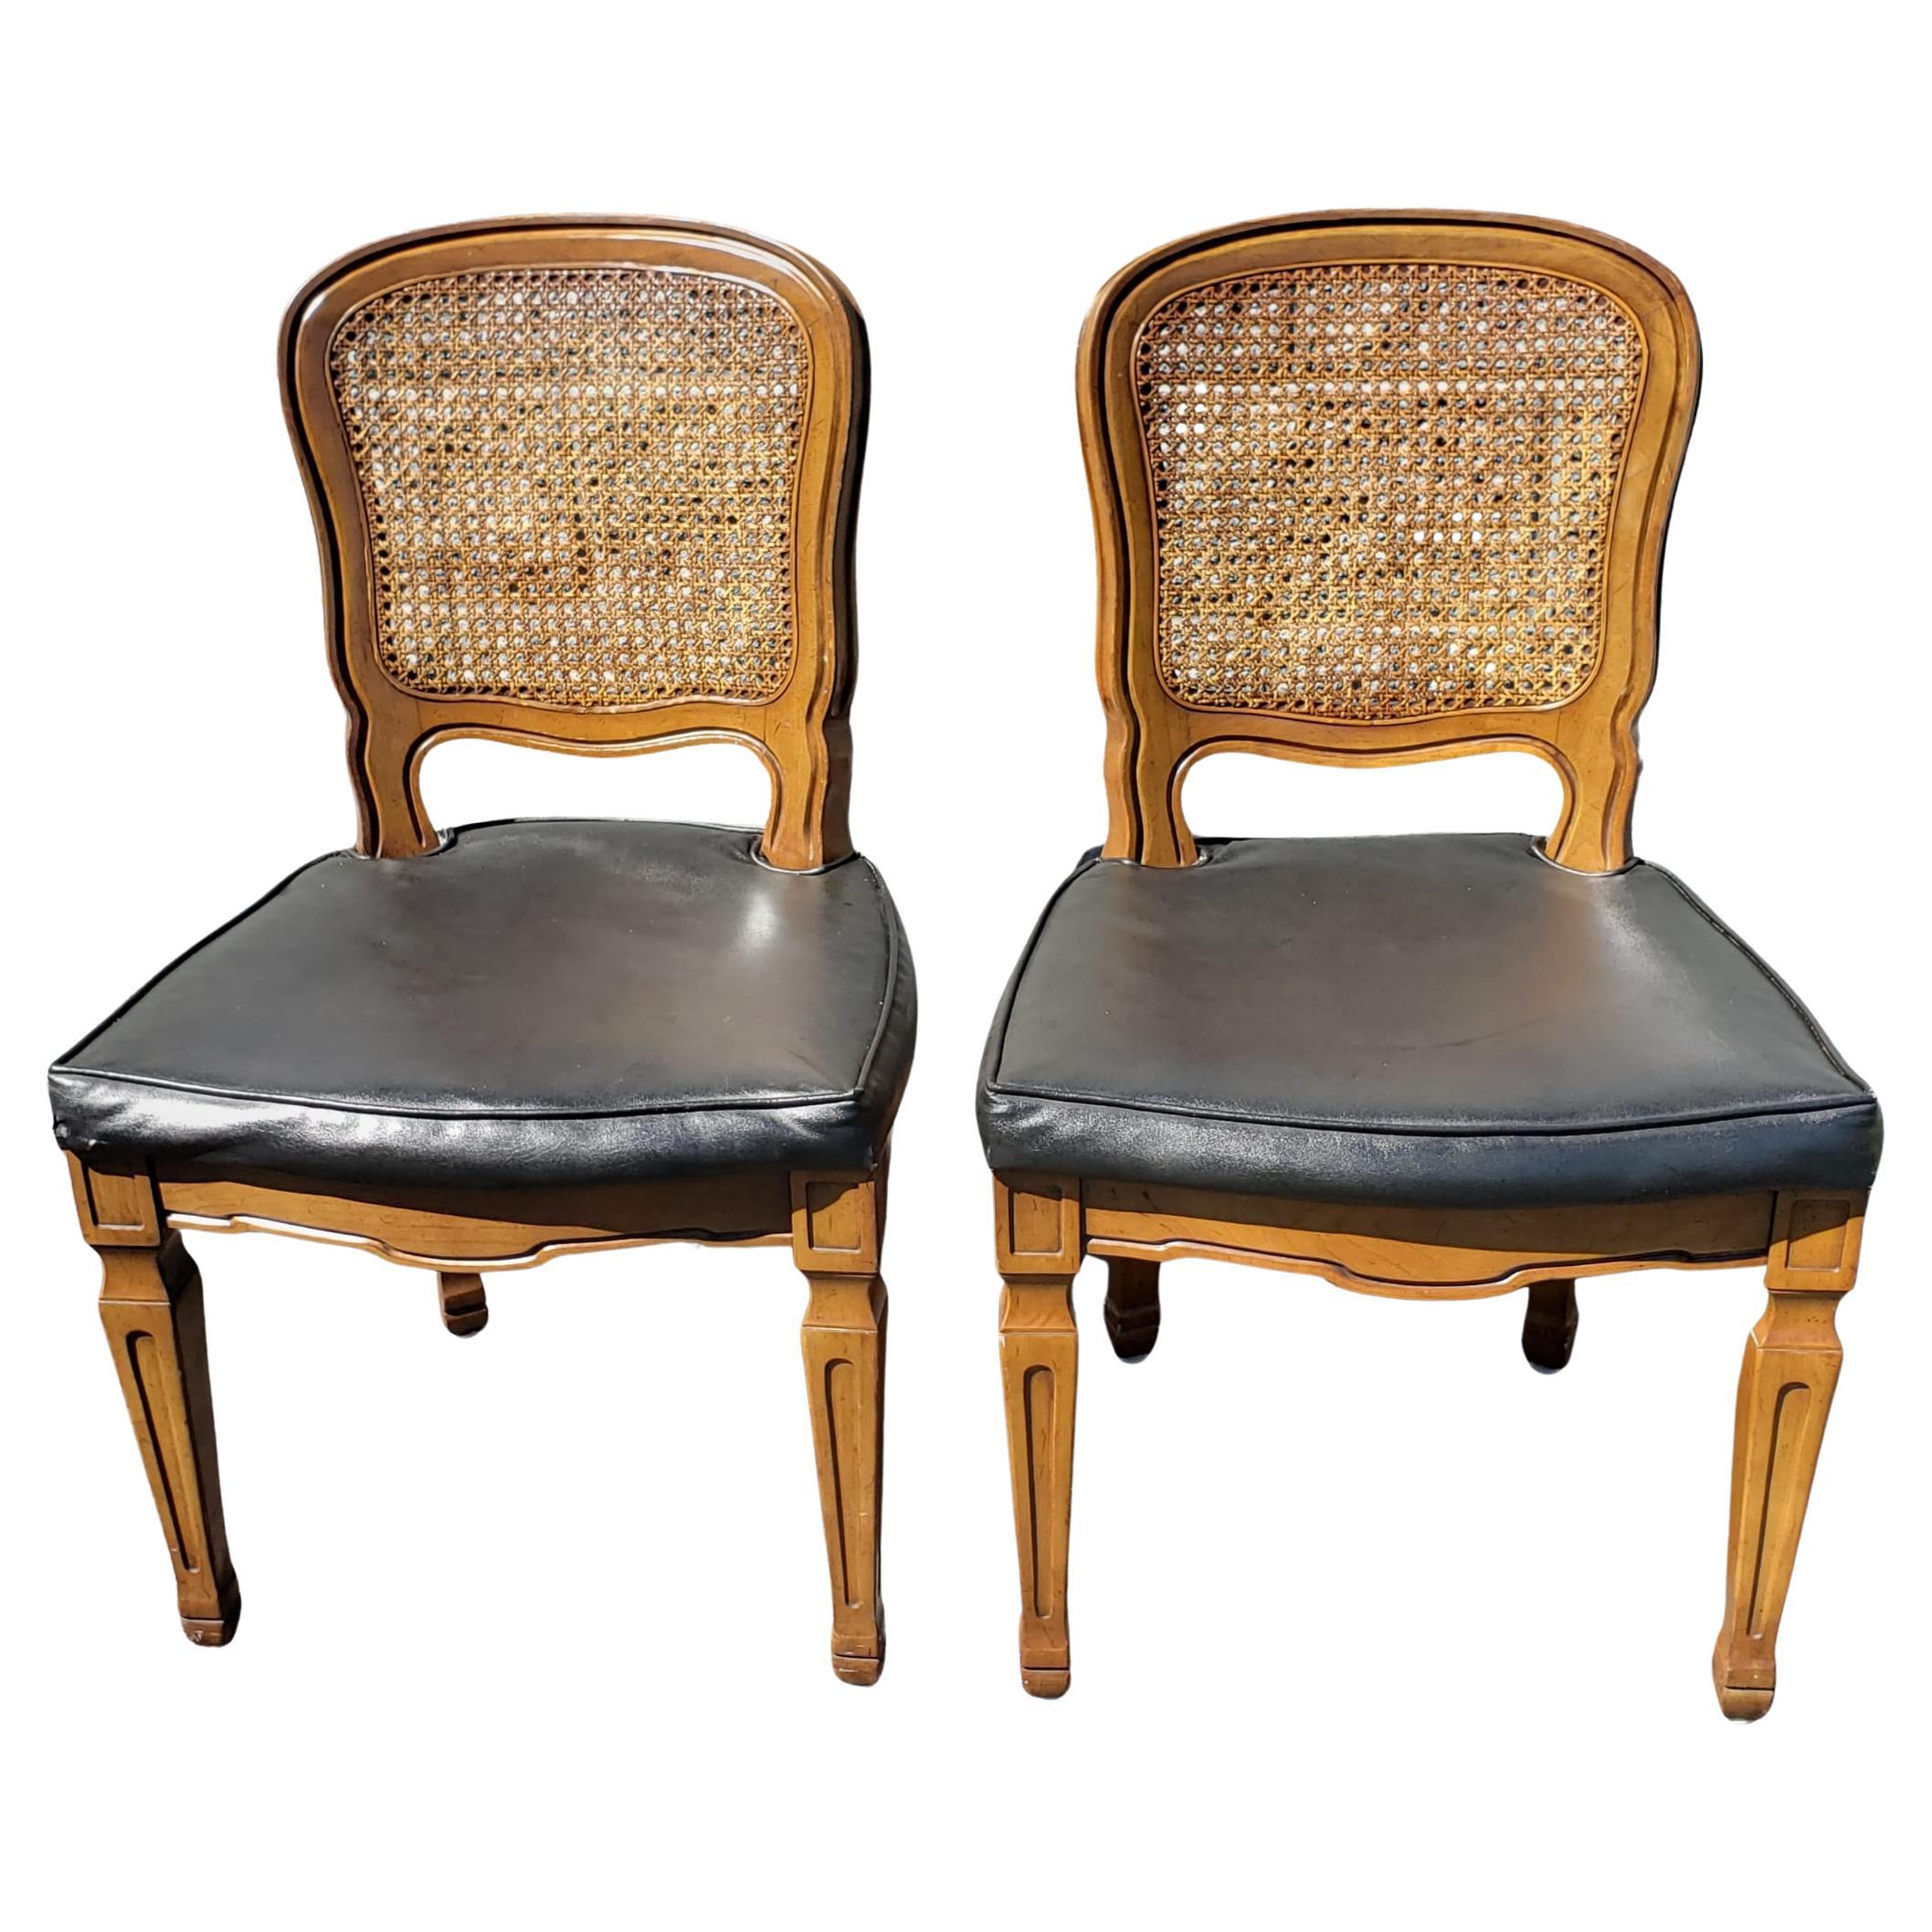 Caning Henredon French Country Cane Back w/ Leatherette Seats Dining Chairs, C 1960s For Sale